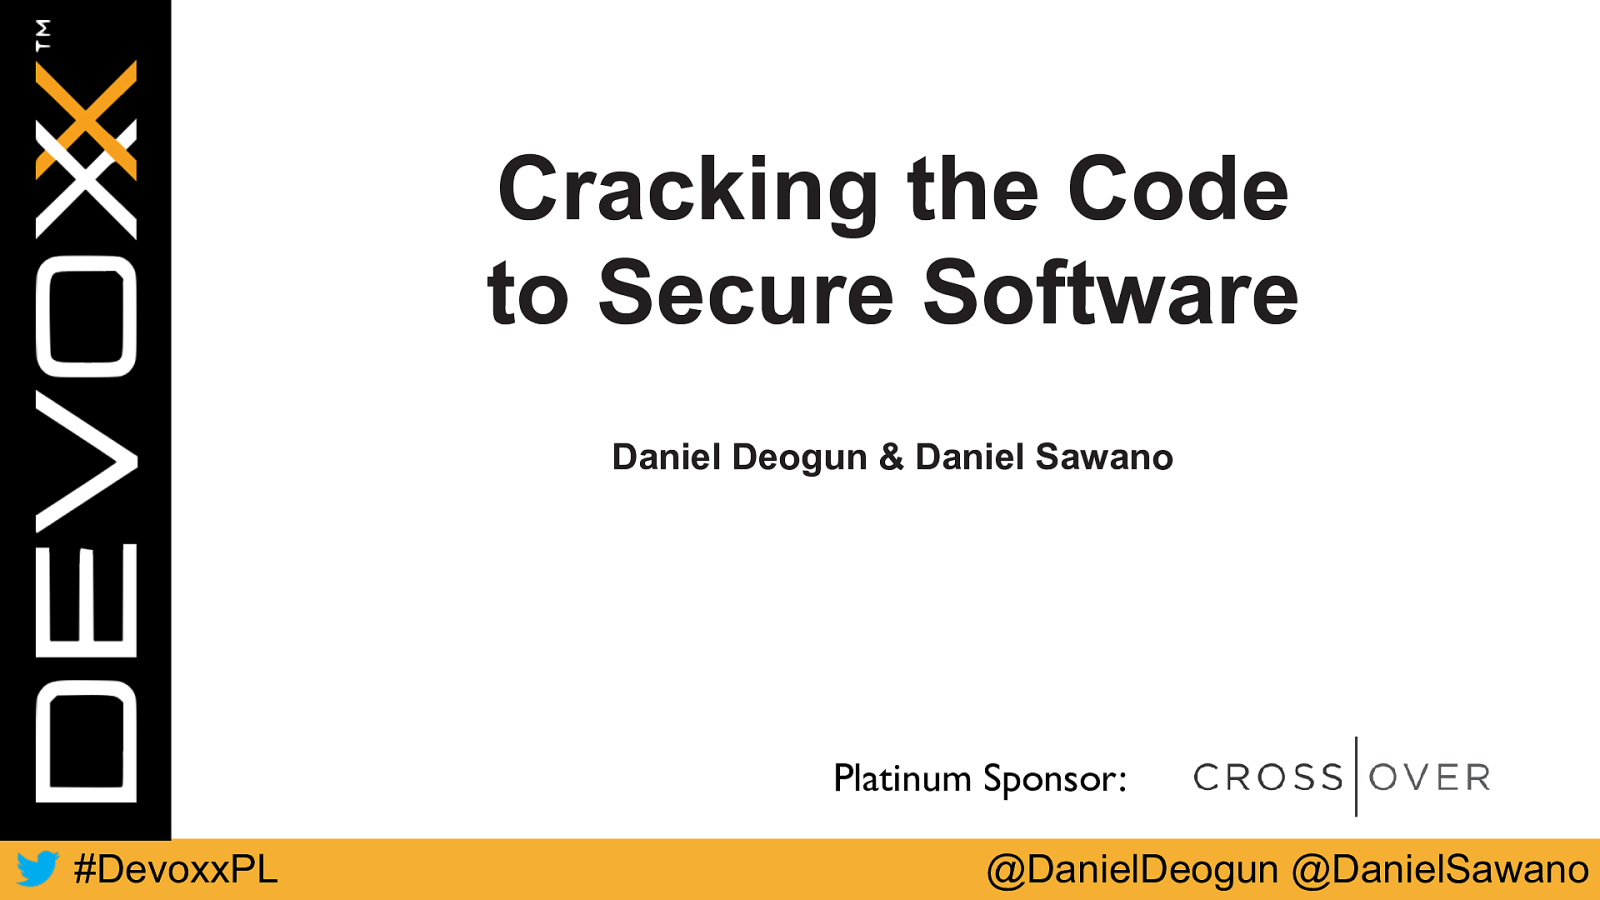 Cracking the Code to Secure Software